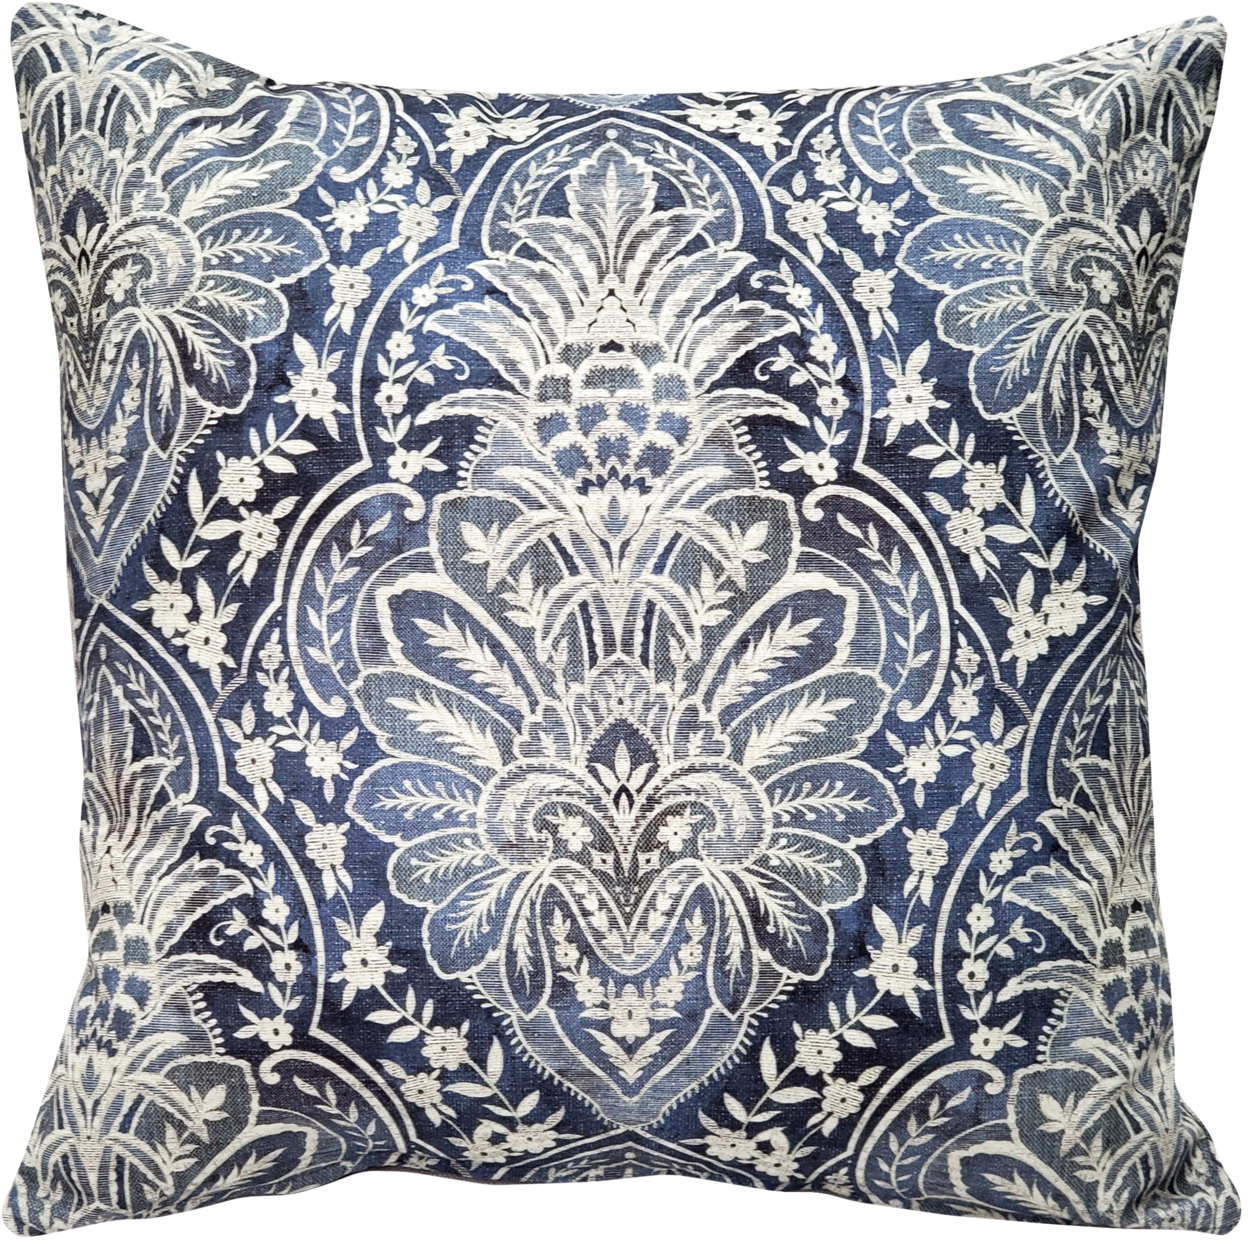 Leone Damask Denim Blue Throw Pillow 21x21 Inches Square, Complete Pillow With Polyfill Pillow Insert